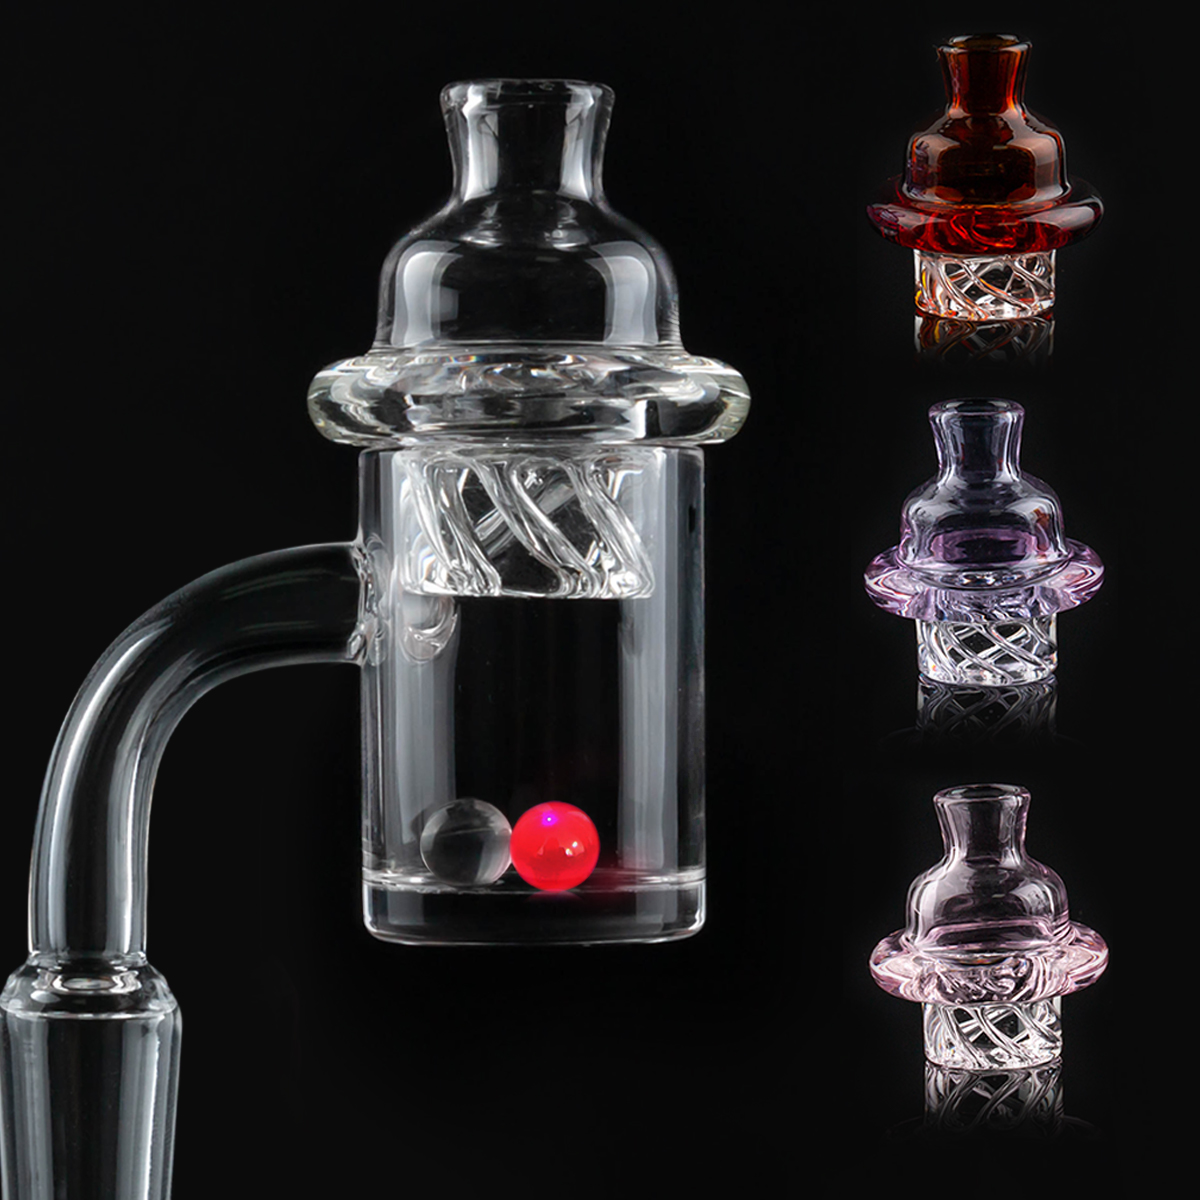 

2020 New 25mm Quartz Banger Nail with Spinning Carb Cap and ruby Terp Pearl Female Male 10mm 14mm 18mm for Dab Rig Bong